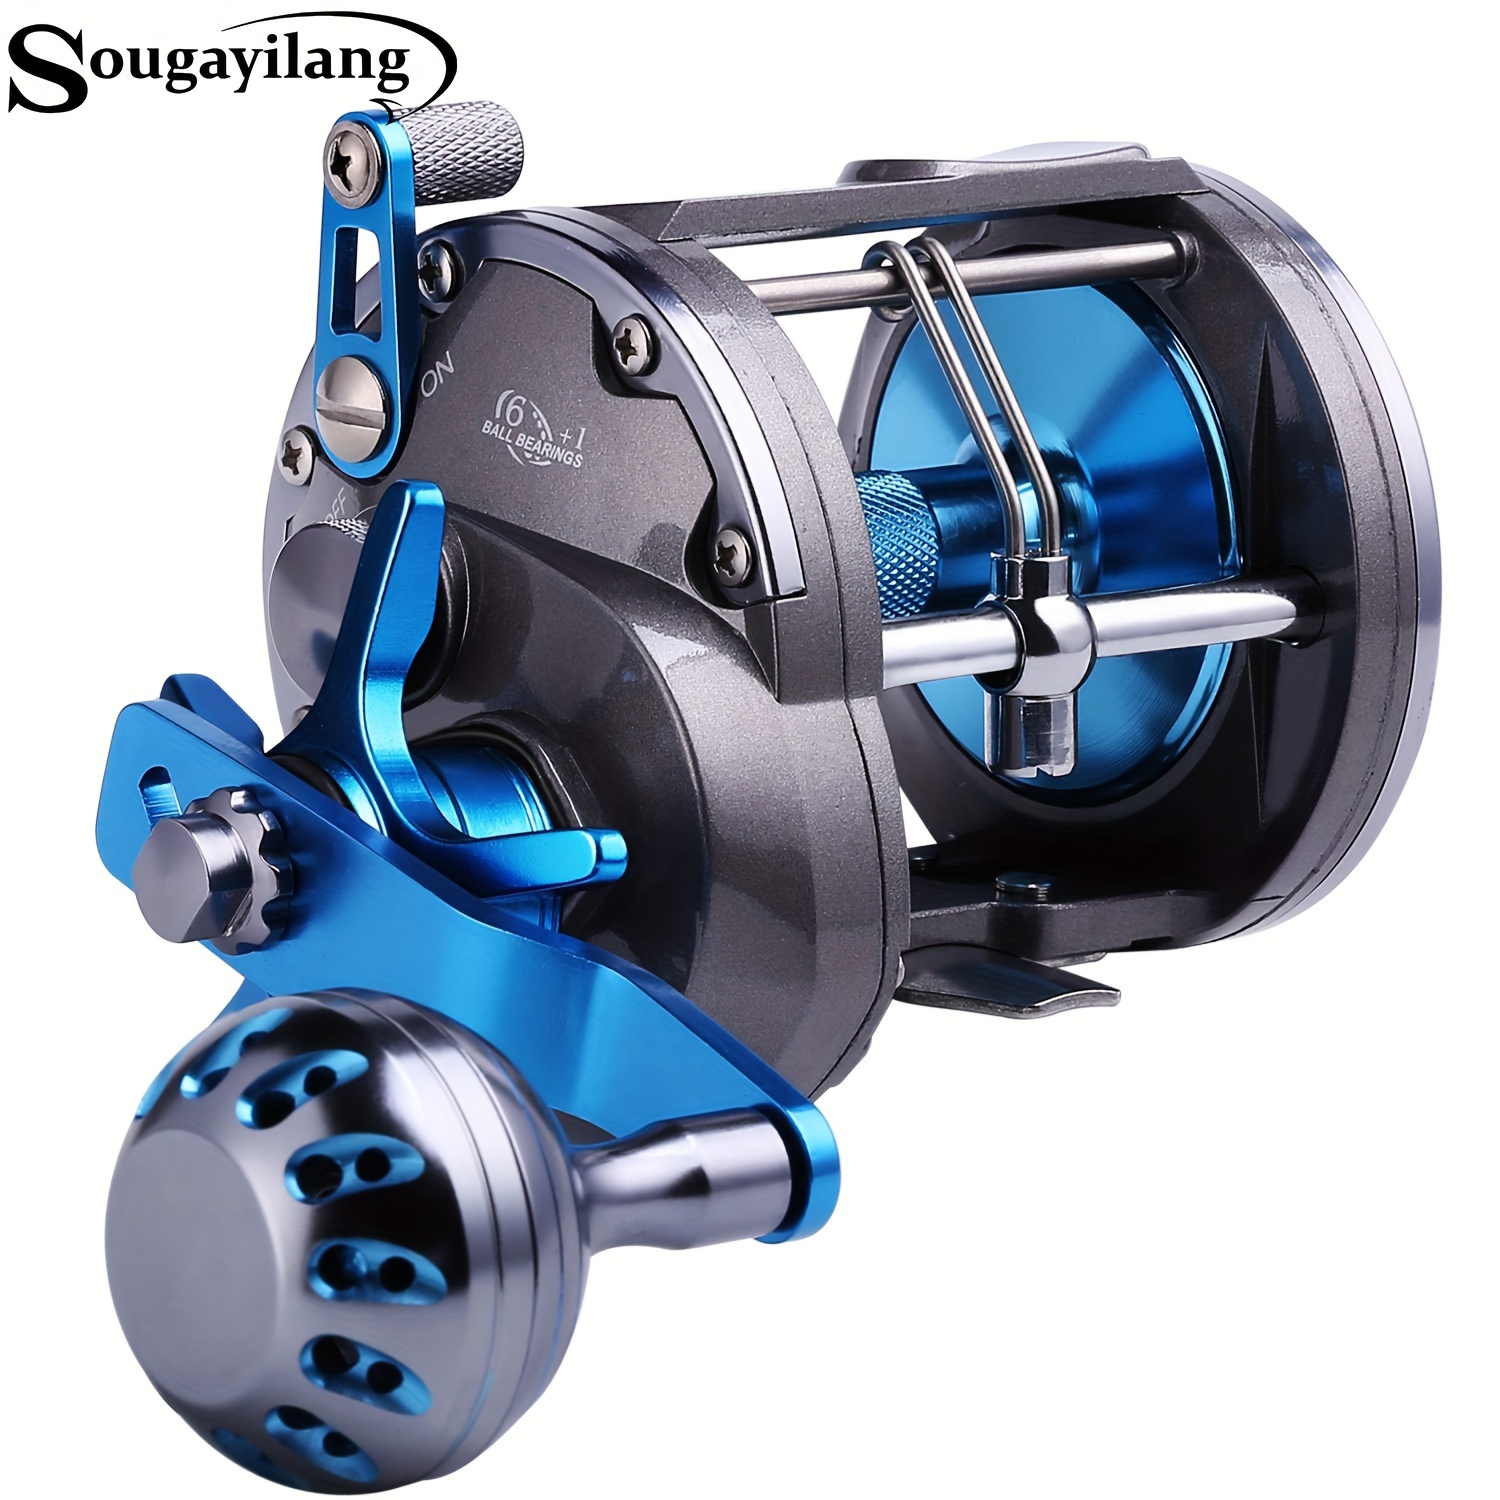 6+1 ball Sougayilang Aluminum Spinning Reel - Smooth Bearings, High Gear  Ratio for Fast Retrieval, Lightweight Design for Comfortable Fishing